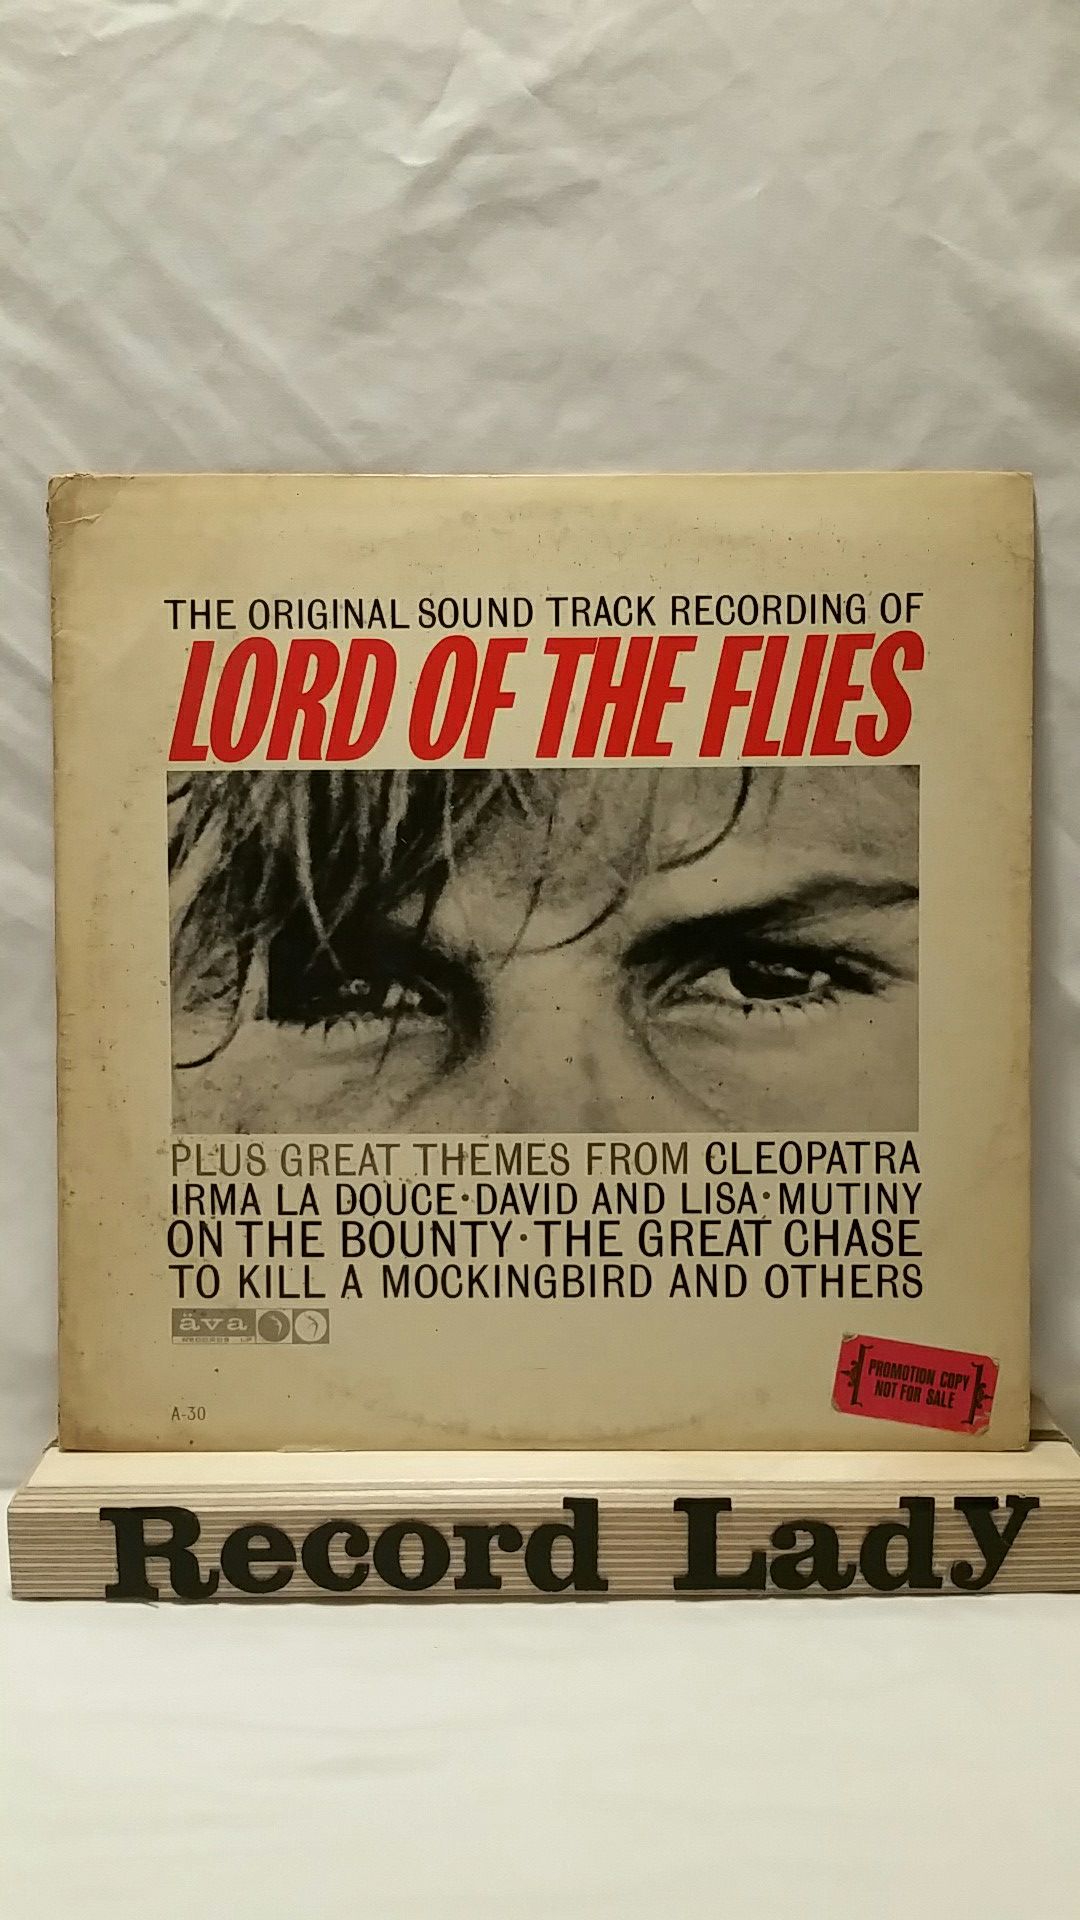 Lord Of The Flies "Soundtrack" vinyl record